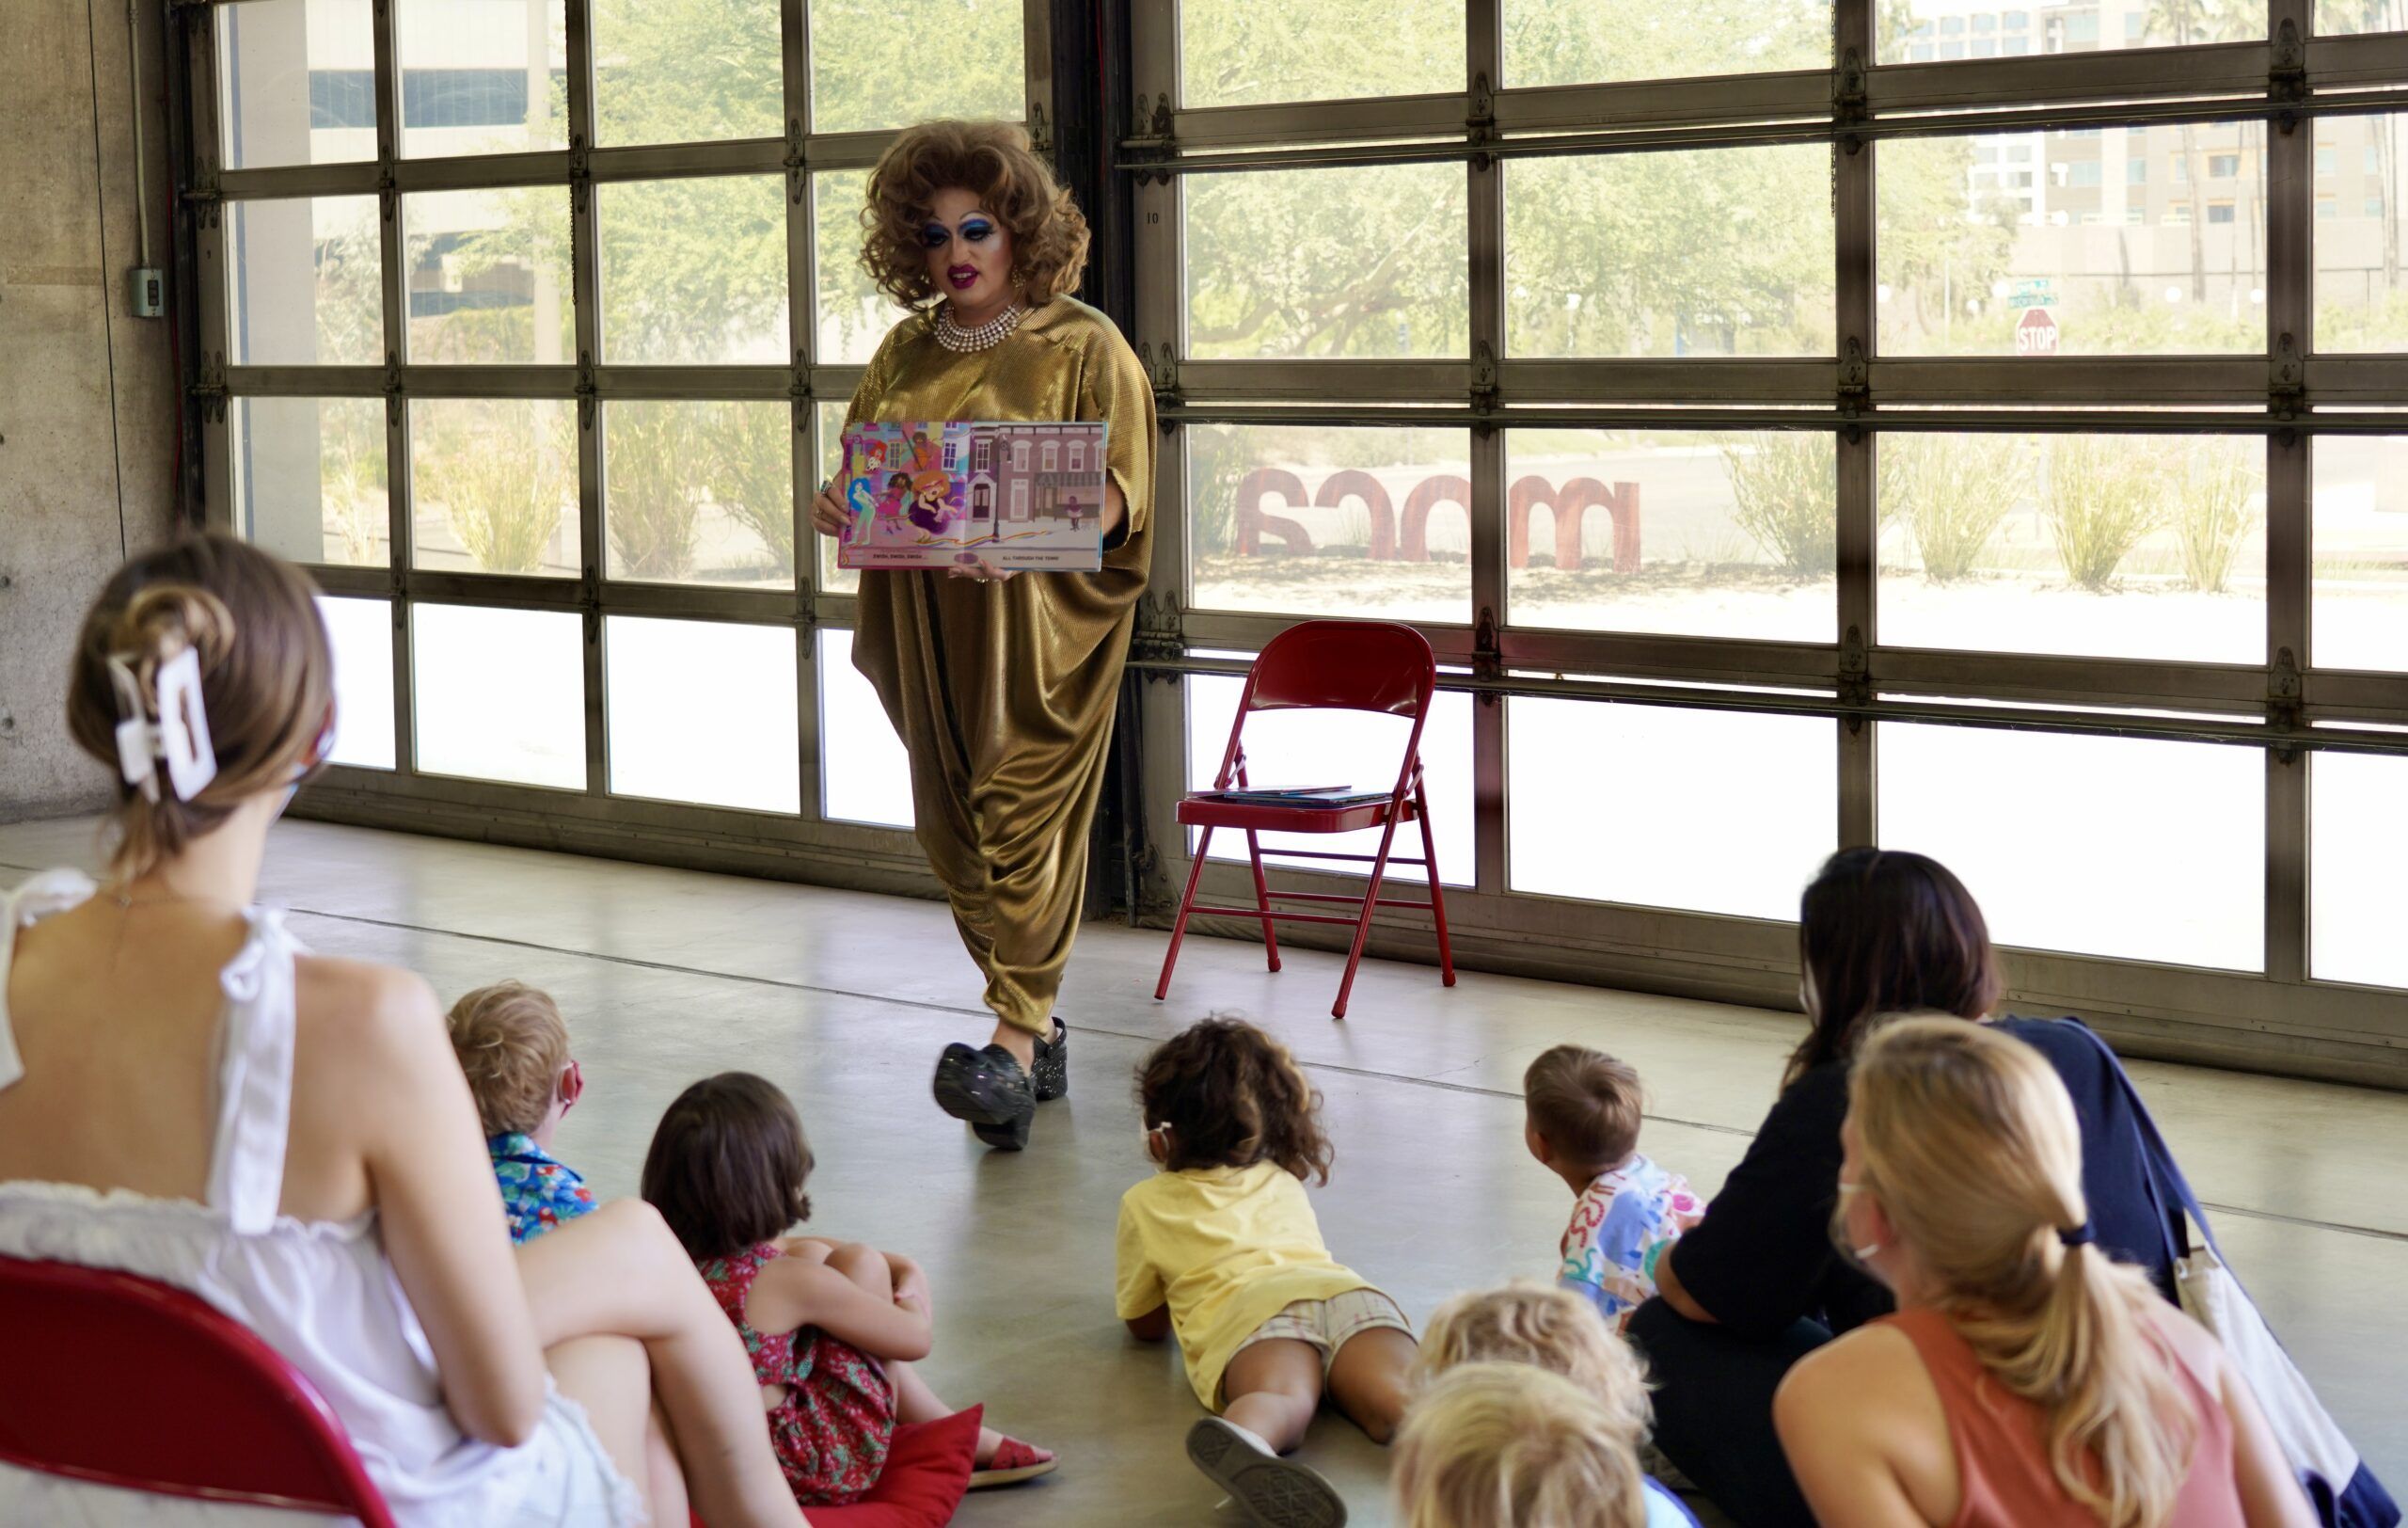 Lil Miss Hot Mess reads to children and adults from her book. Photo by Tammy Orr Wyant / MOCA Tucson.